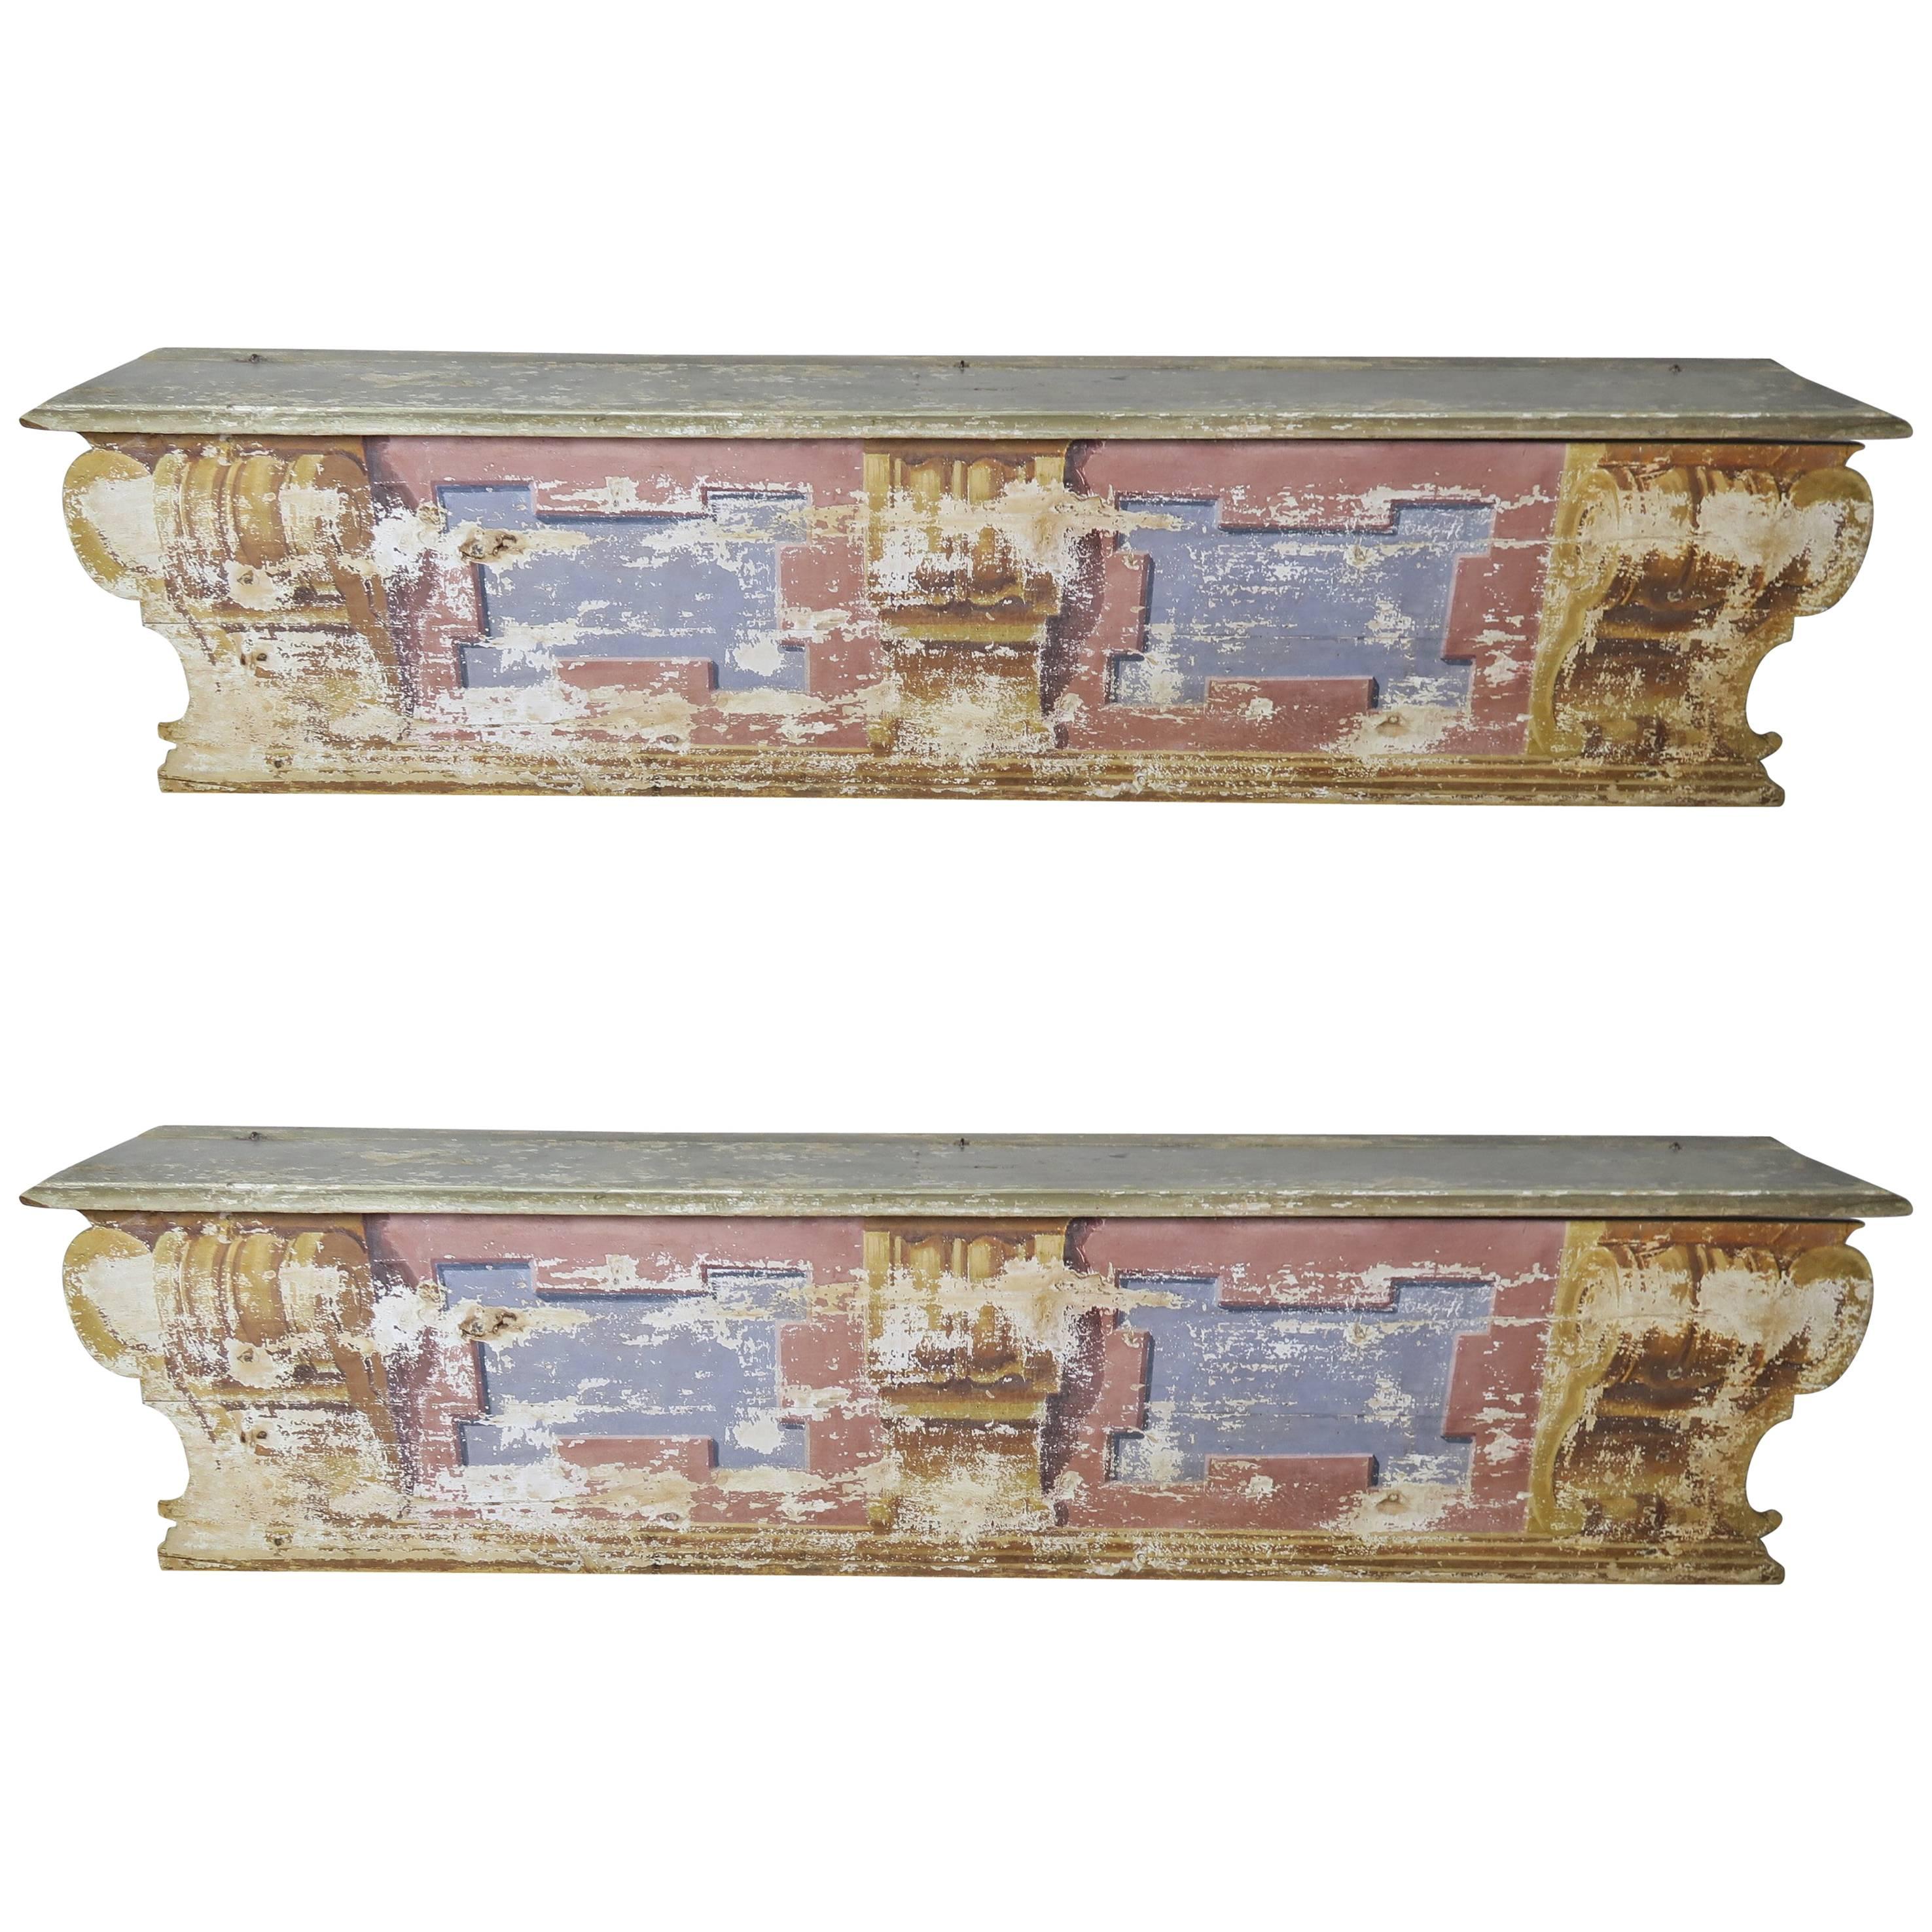 Pair of 19th Century Italian Painted Benches